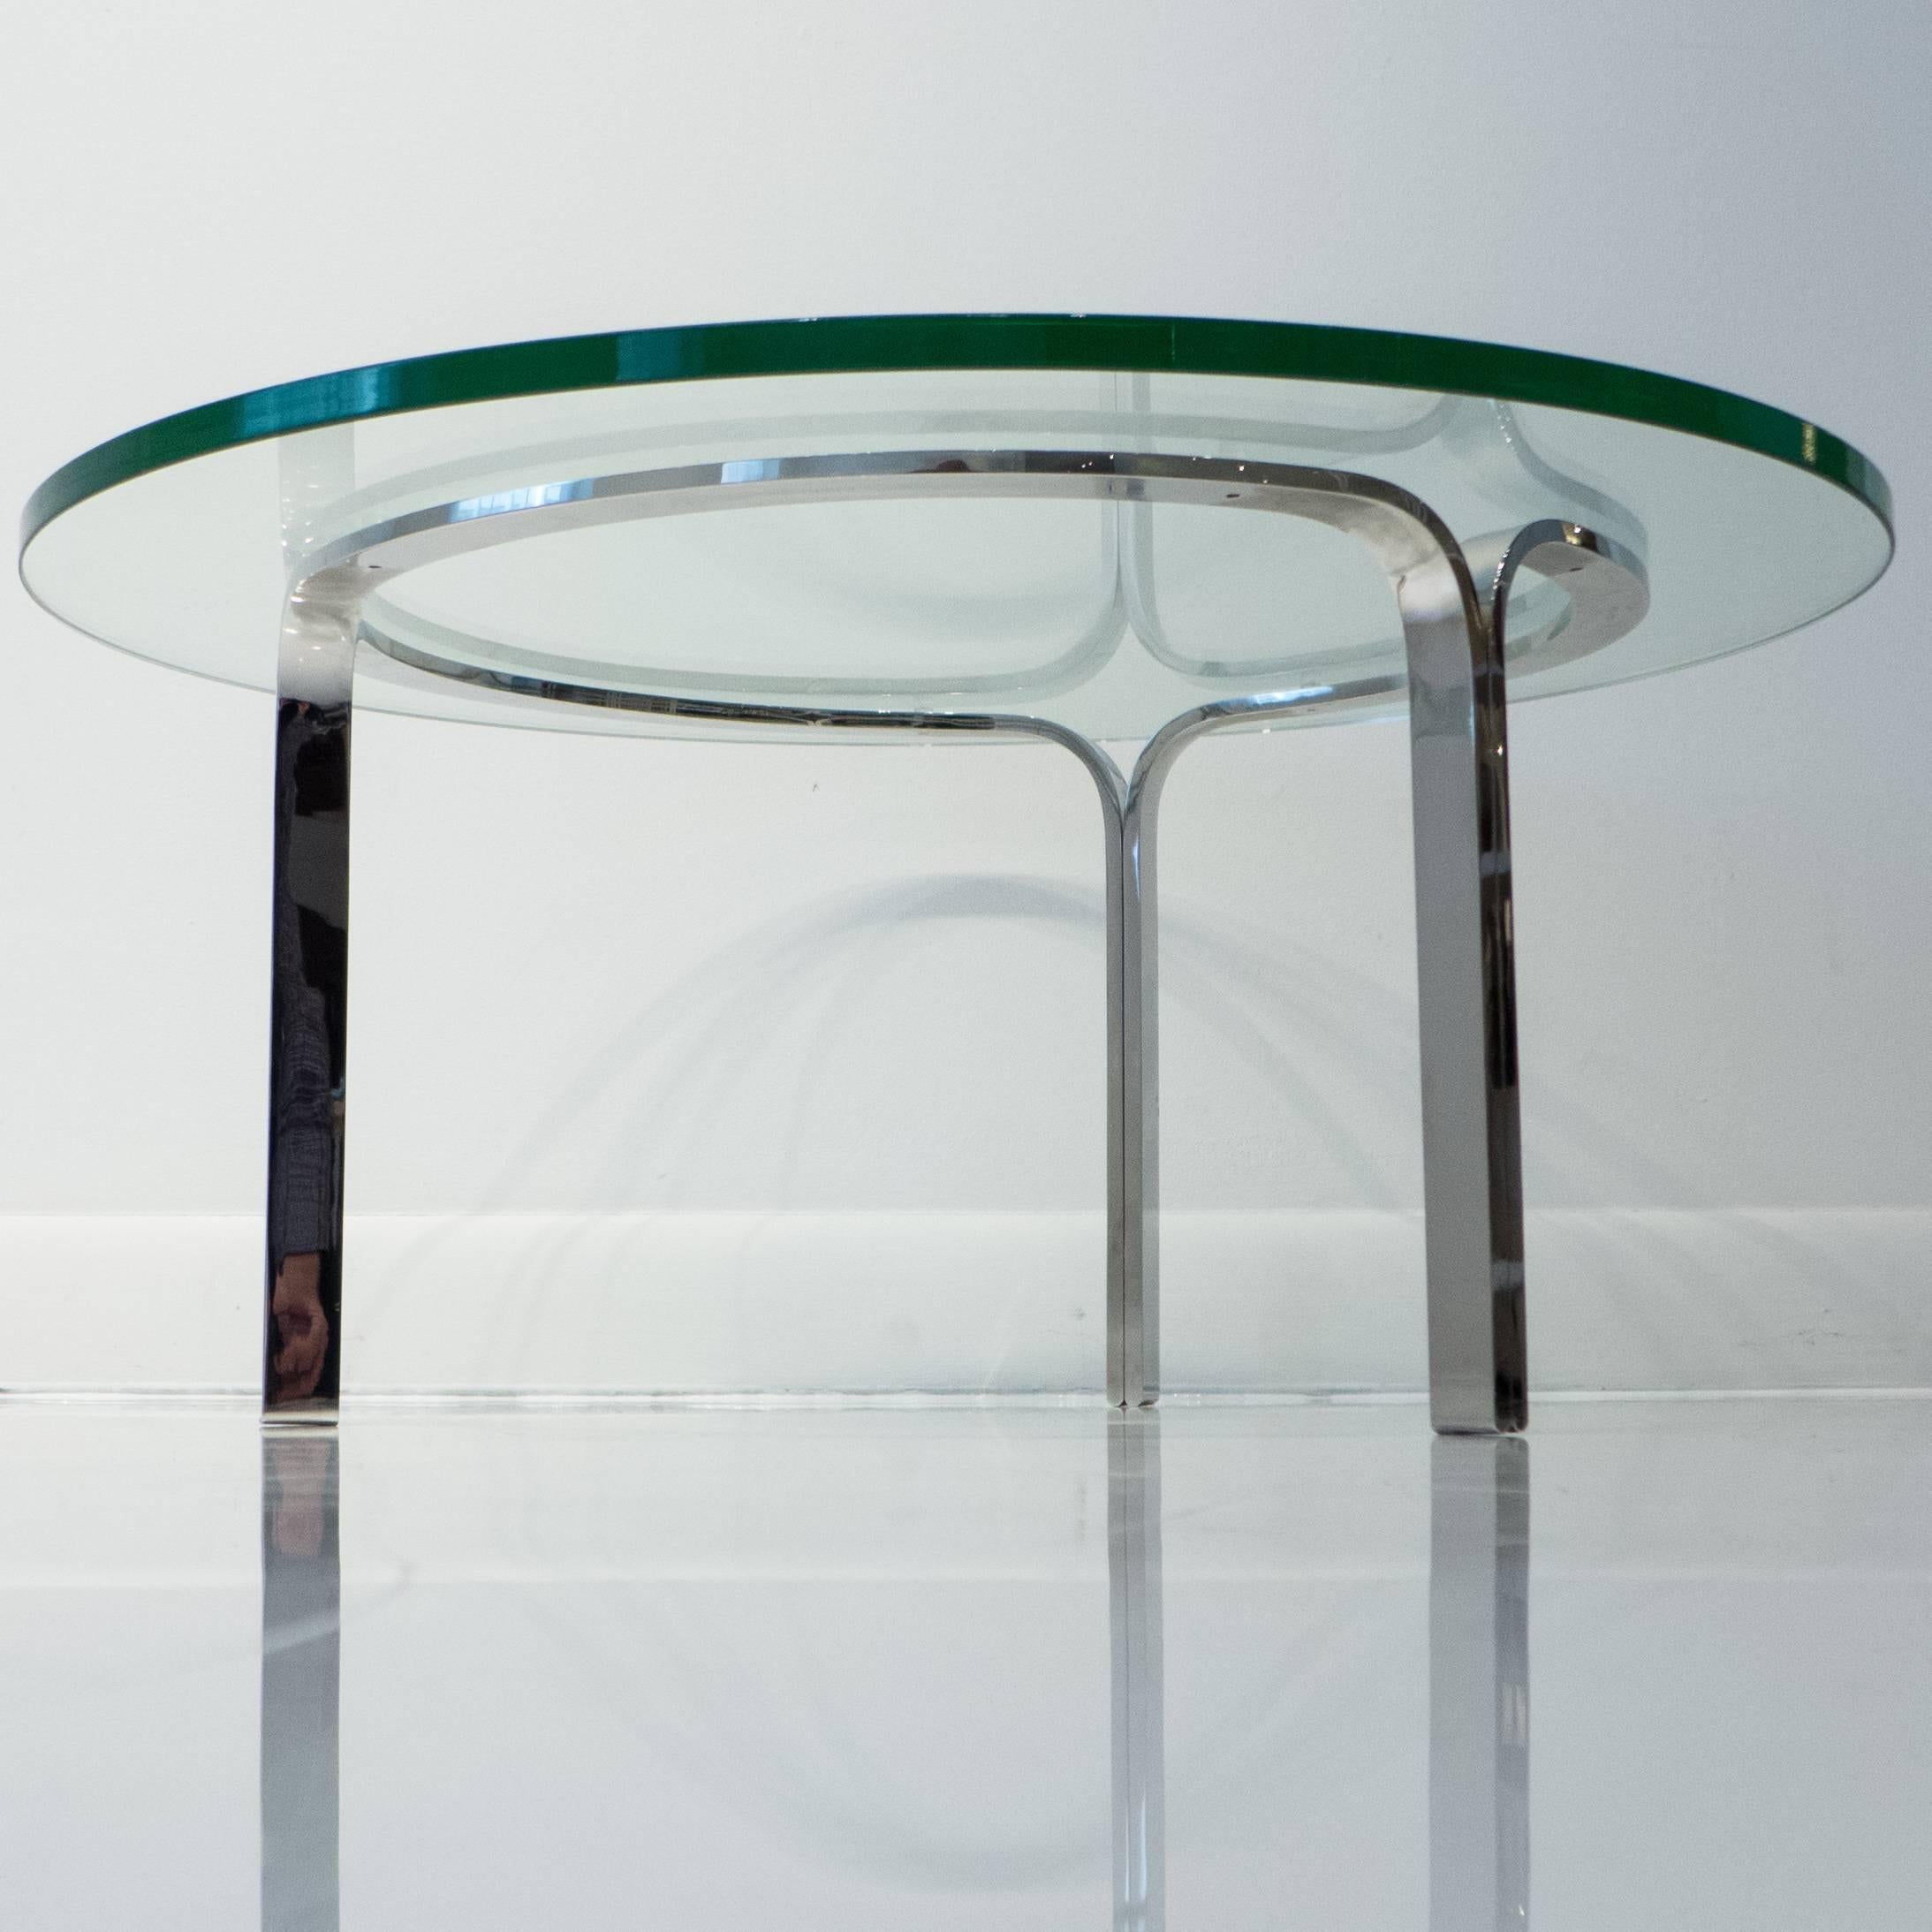 Cocktail table of polished stainless steel with a glass top. A 1960 Nicos Zographos design produced by Zographos Designs, Ltd, circa 2010. In excellent condition, with stamped mark underneath.